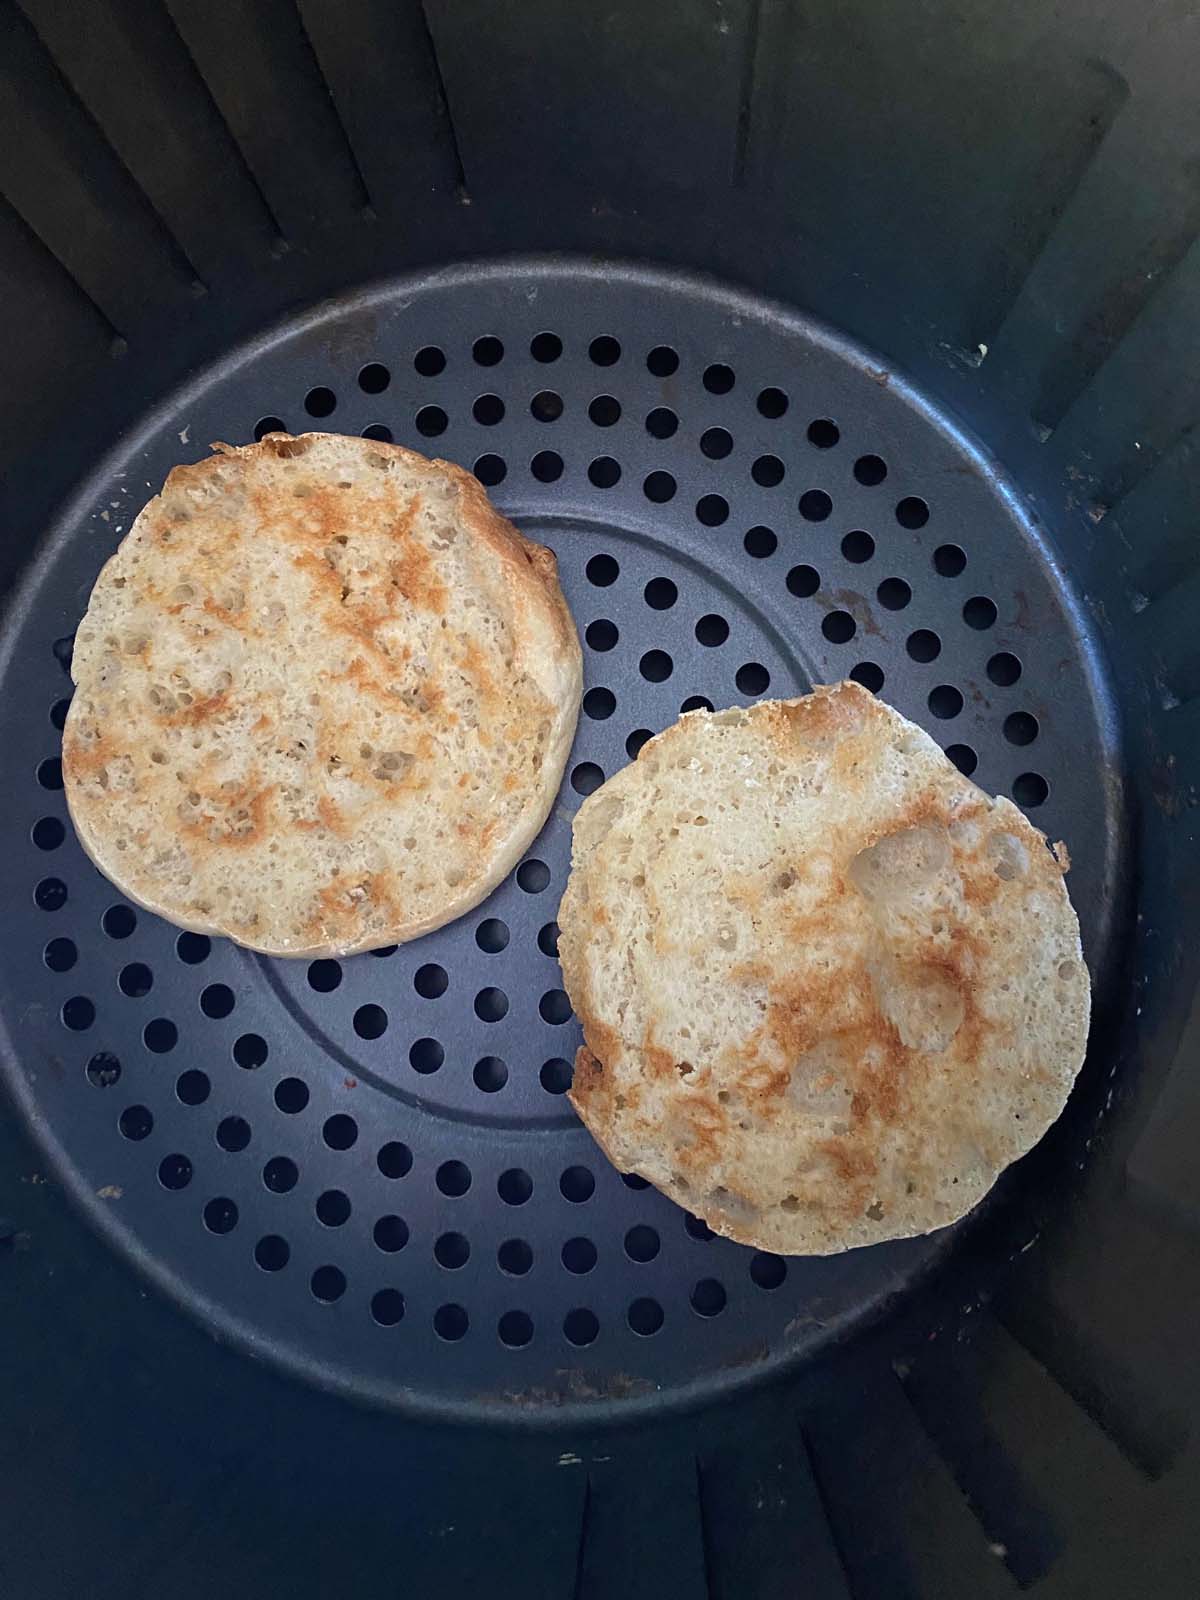 Toasted english muffin in an air fryer.